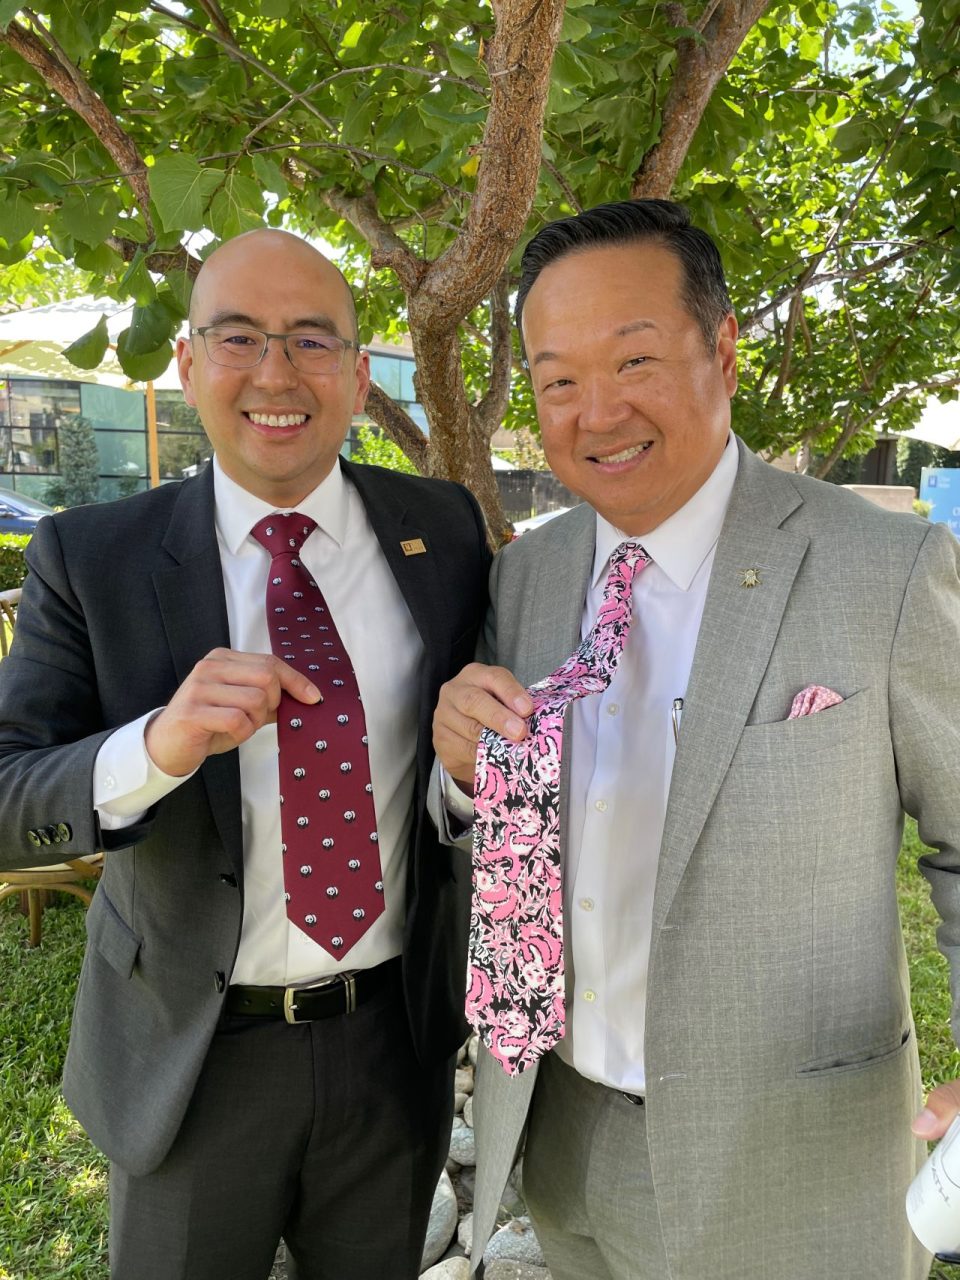 Ed Kim: Congratulations to Richard T. Lee on being named the Cherng Family Director’s Chair for the Center for Integrative Oncology at City of Hope.